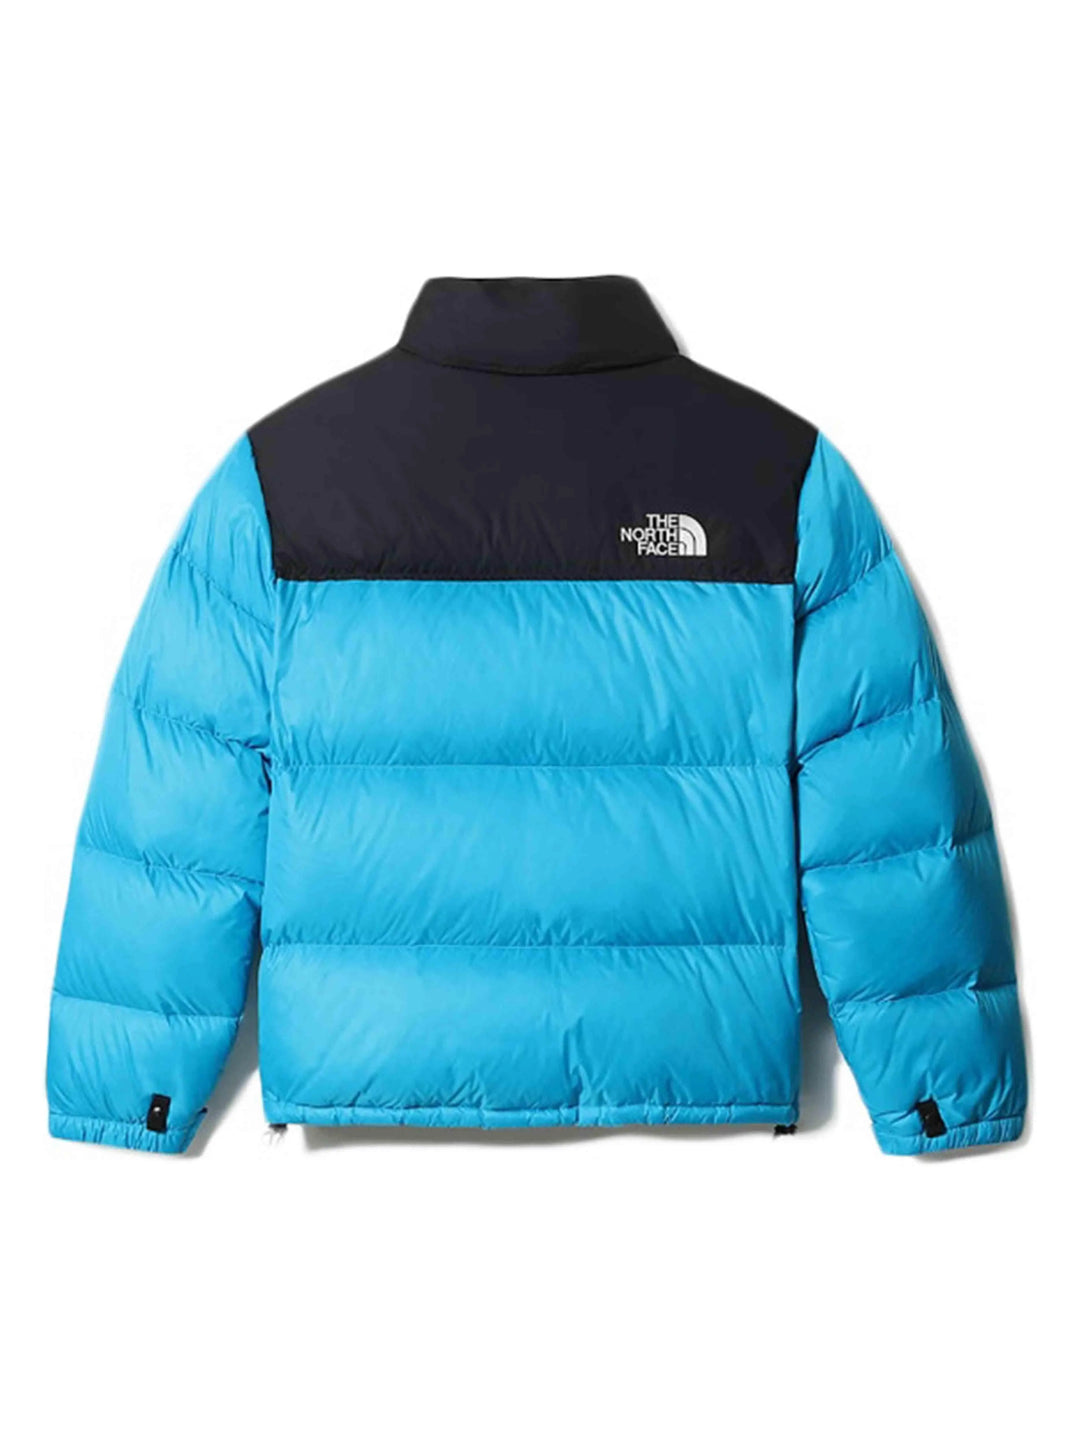 The North Face 1996 Retro Nuptse Packable Jacket Meridian Blue Prior